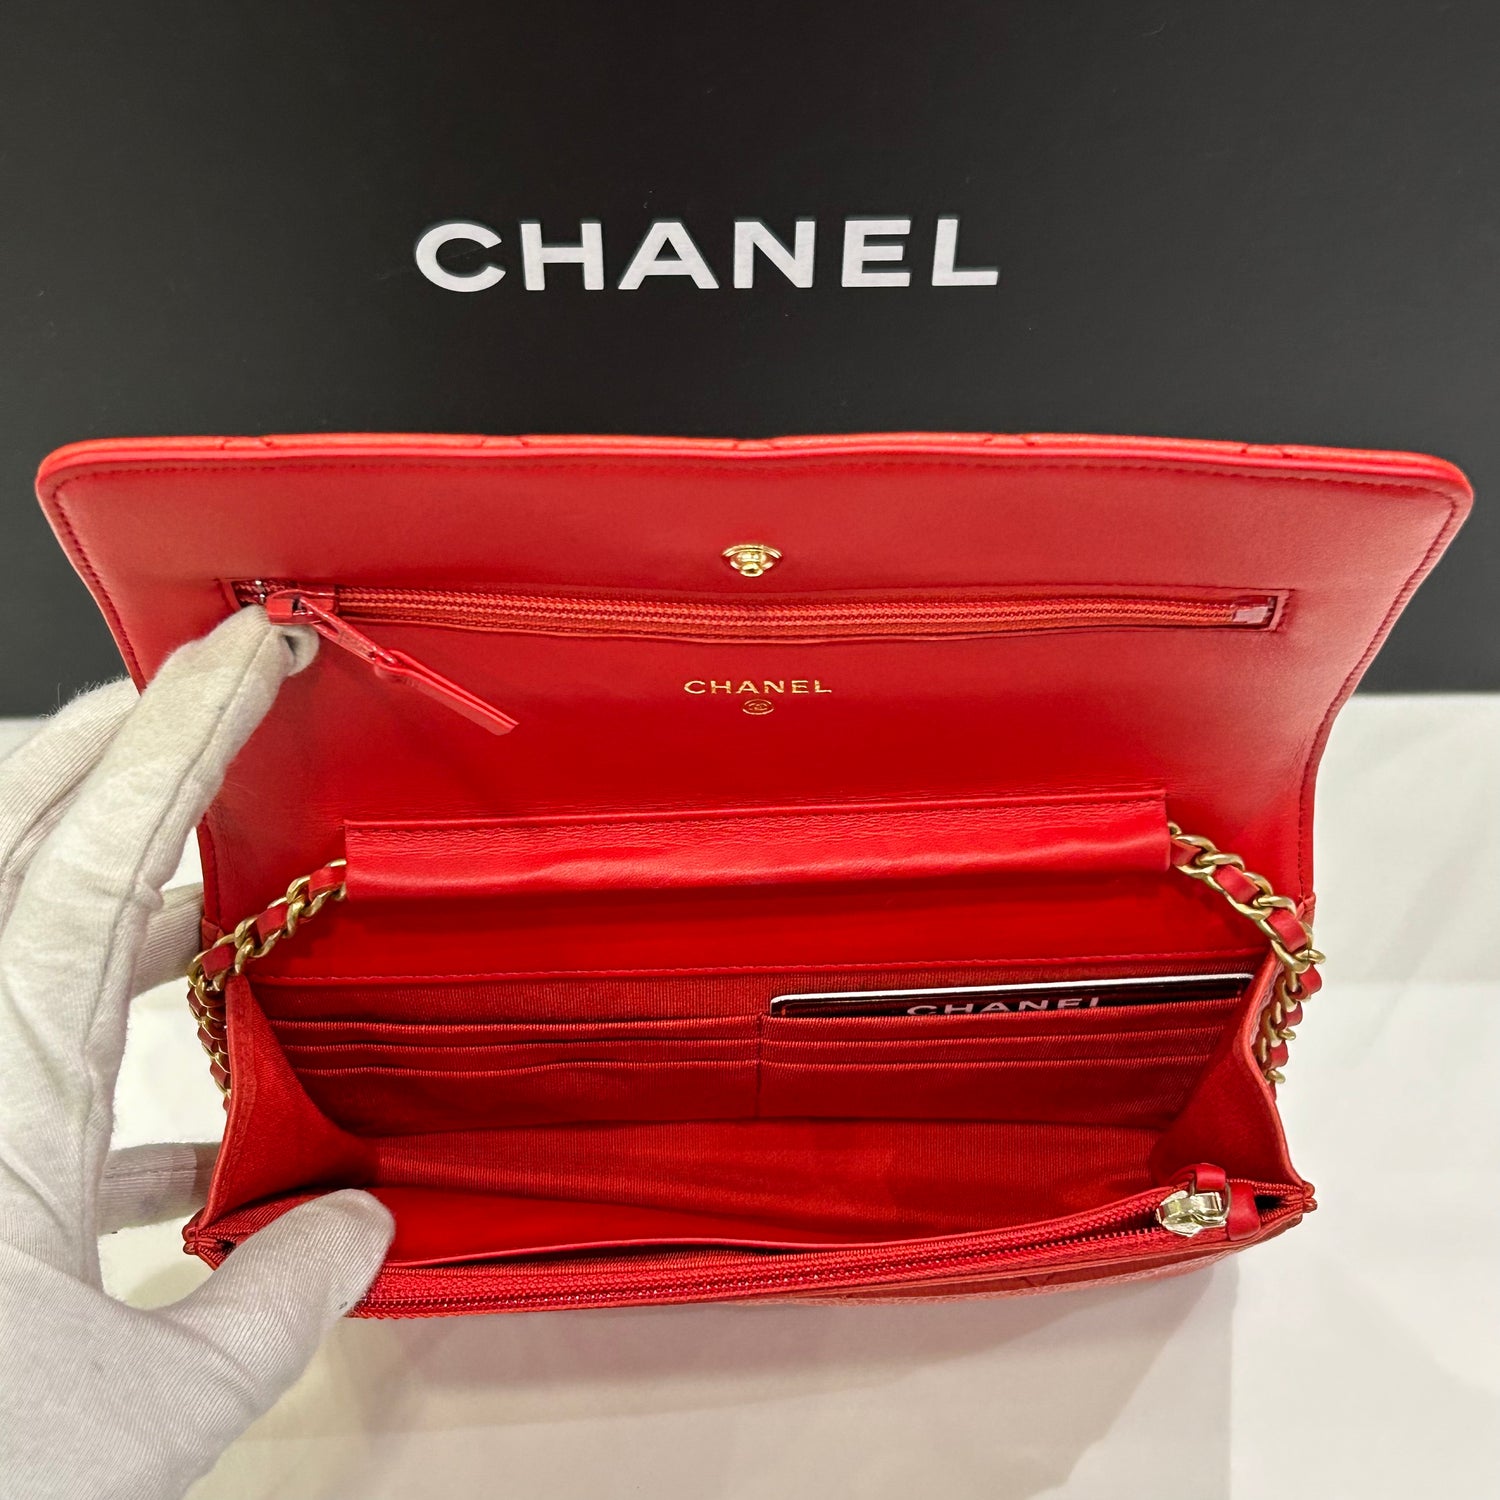 Chanel - Wallet on chain limited edition